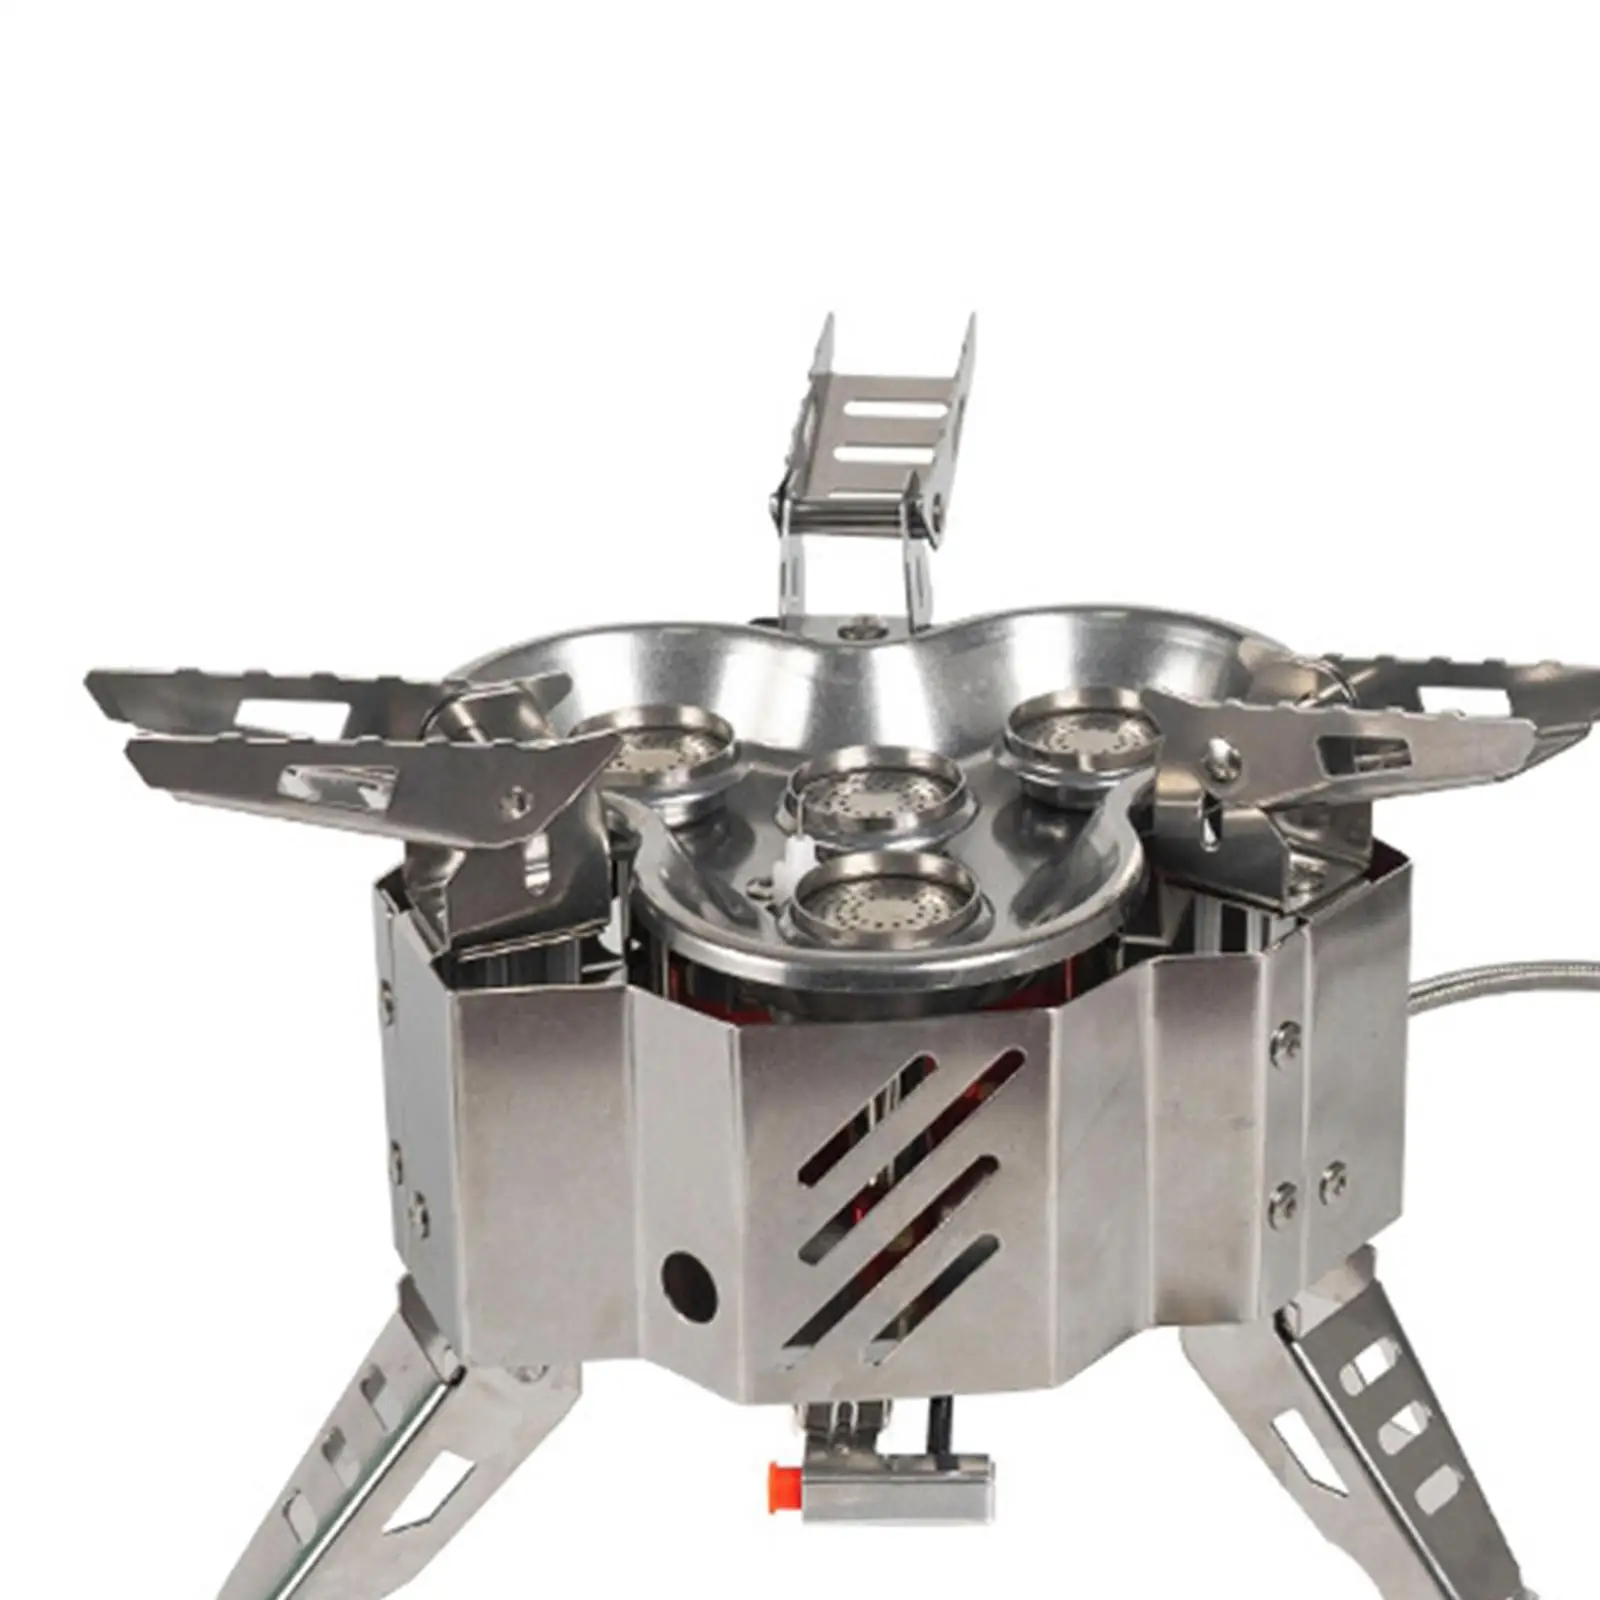 Folding Camping Gas Stove Ultralight with Carrying Case for Hiking Picnic